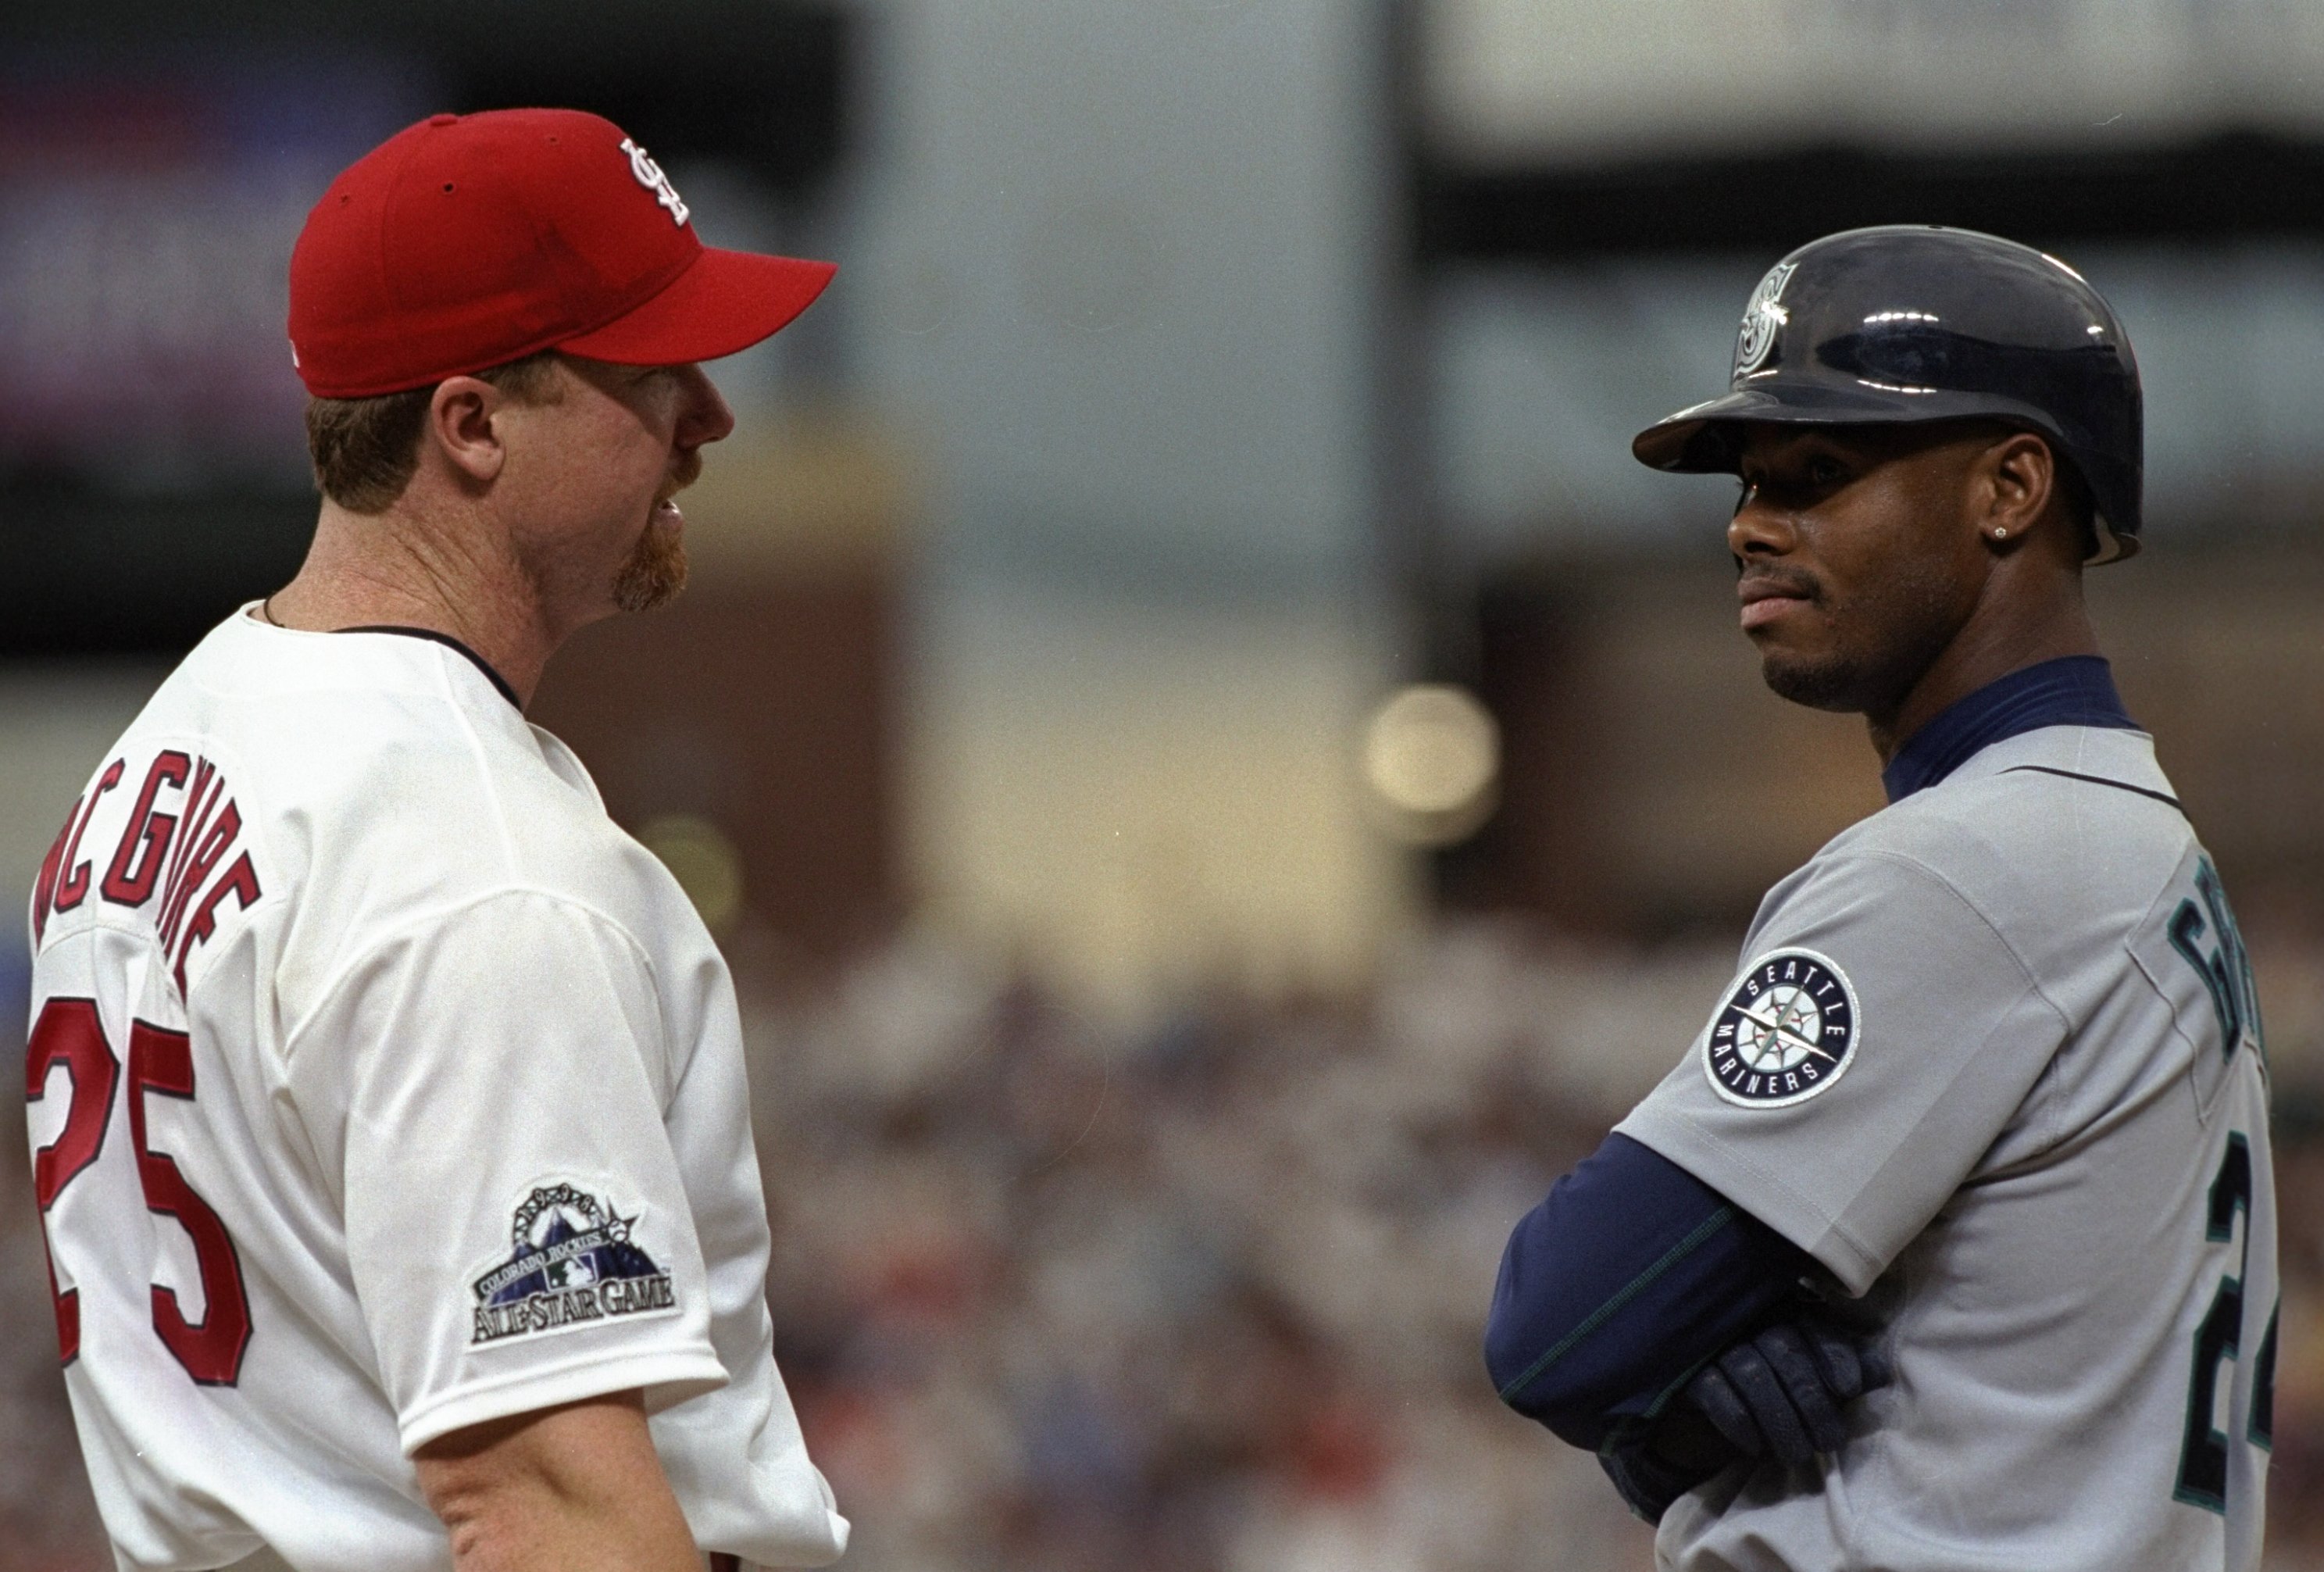 Mark McGwire exclusive: 25 years after 1998 MLB Home Run Chase